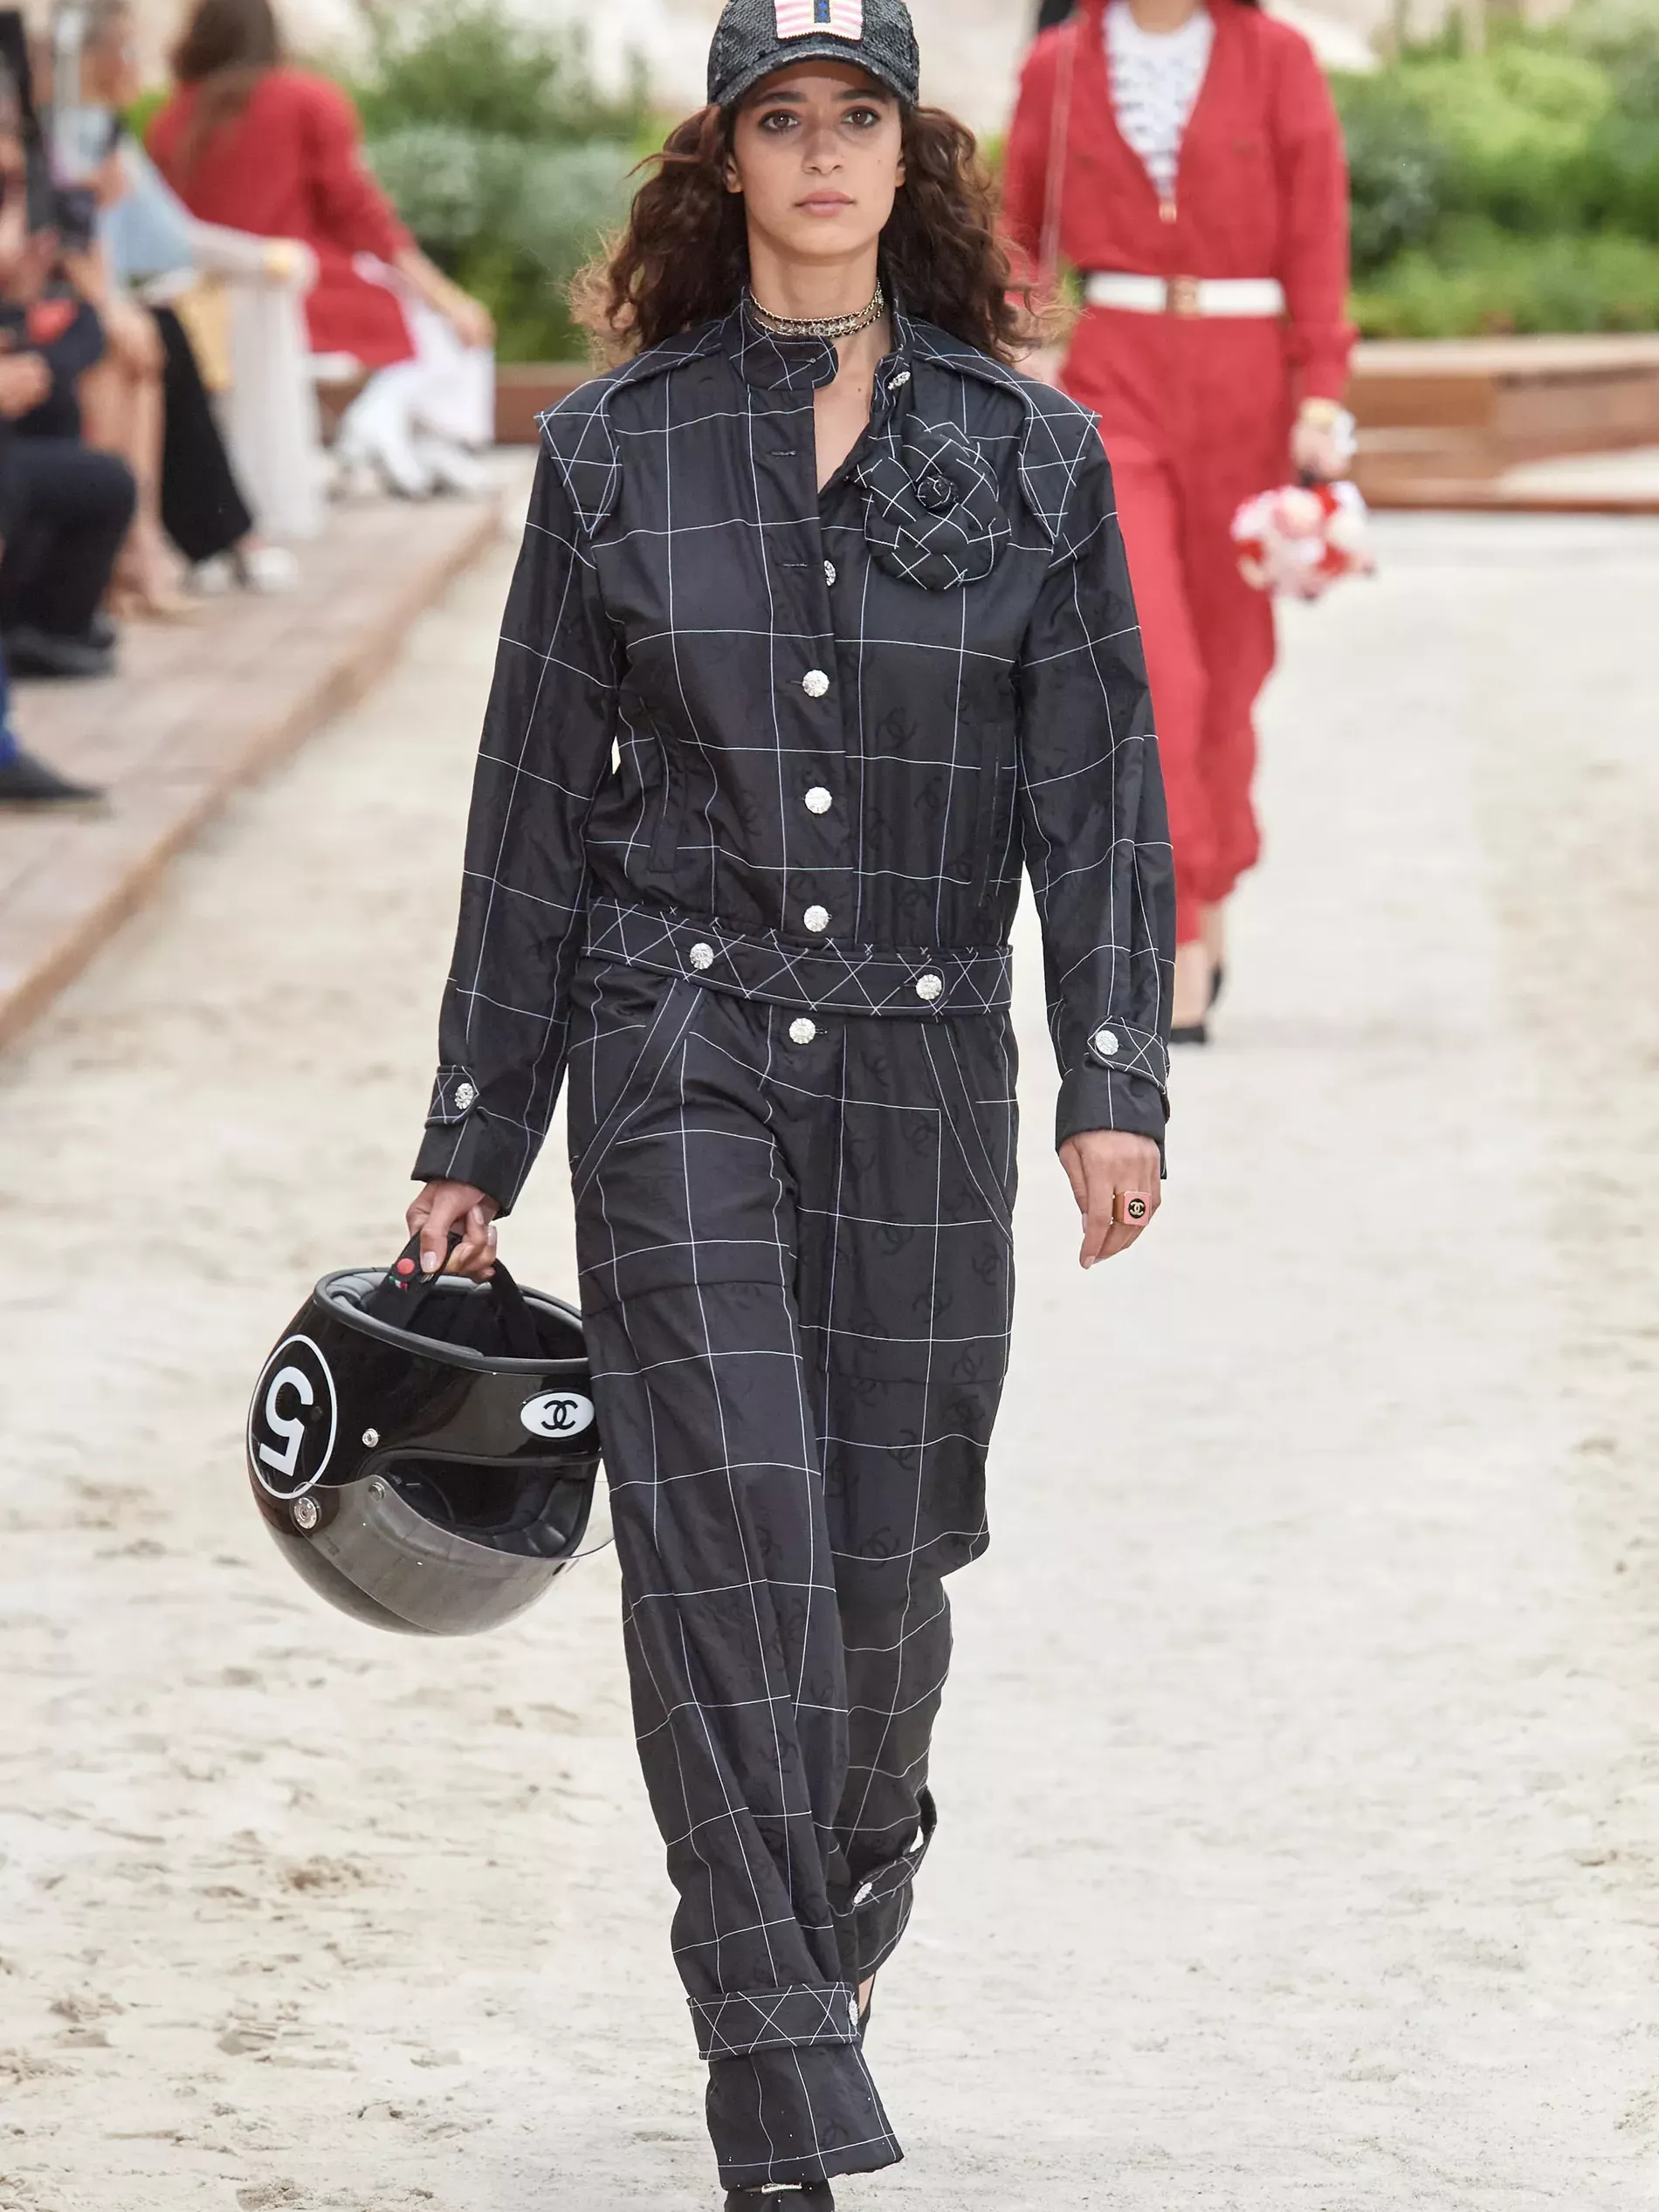 Check Out That Adorable Helmet Minaudière From #CHANELCruise